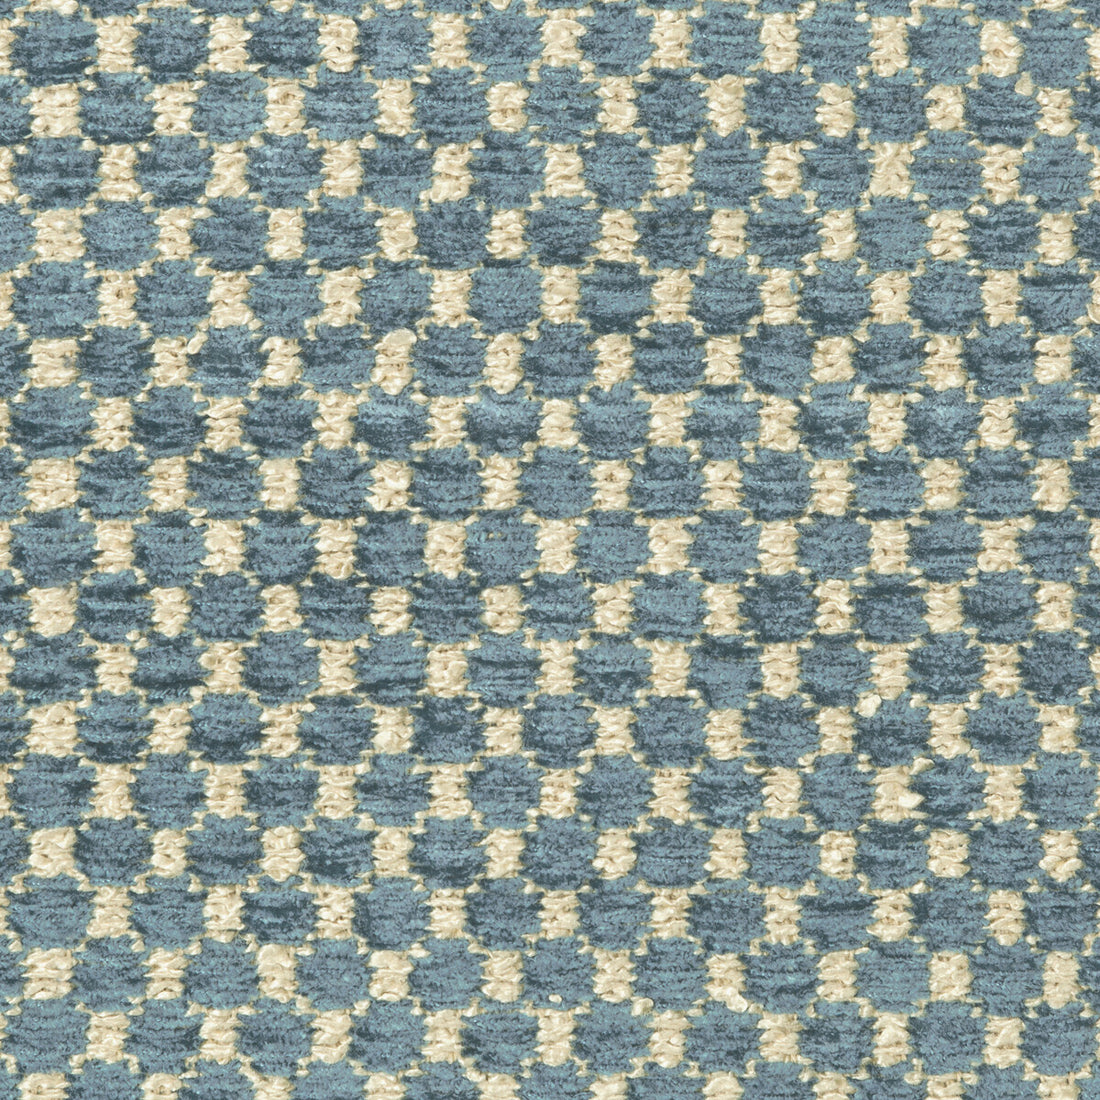 Ecrins Texture fabric in teal color - pattern 8019147.13.0 - by Brunschwig &amp; Fils in the Chambery Textures II collection